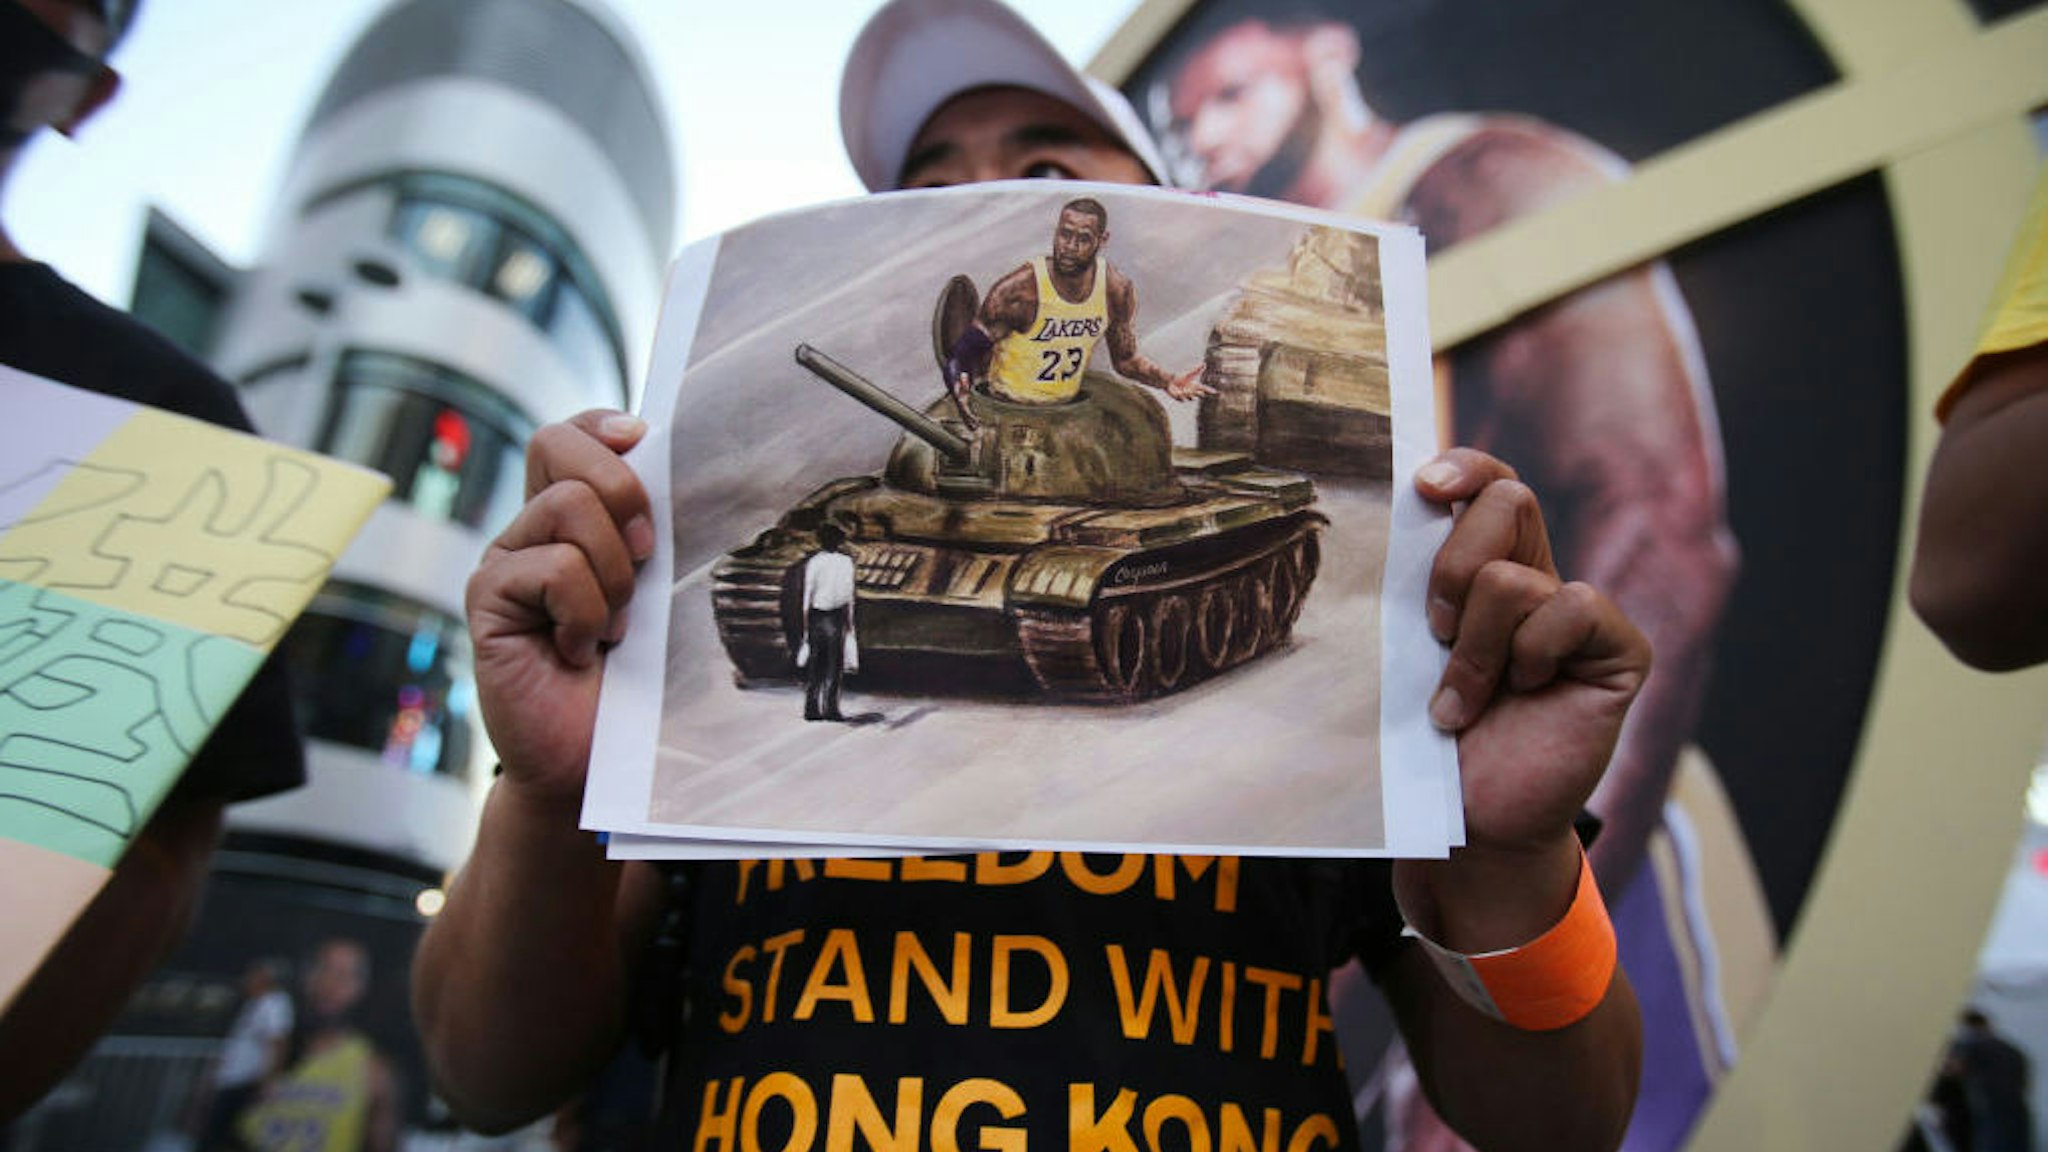 A pro-Hong Kong activist holds an image depicting LeBron James aboard a Chinese tank in Tiananmen Square before the Los Angeles Lakers season opening game against the LA Clippers outside Staples Center on October 22, 2019 in Los Angeles, California. Activists also printed at least 10,000 pro-Hong Kong t-shirts to hand out to those attending the game and encouraged them to wear the free shirts as a form of peaceful protest against China amidst Chinese censorship of NBA games. (Photo by Mario Tama/Getty Images)